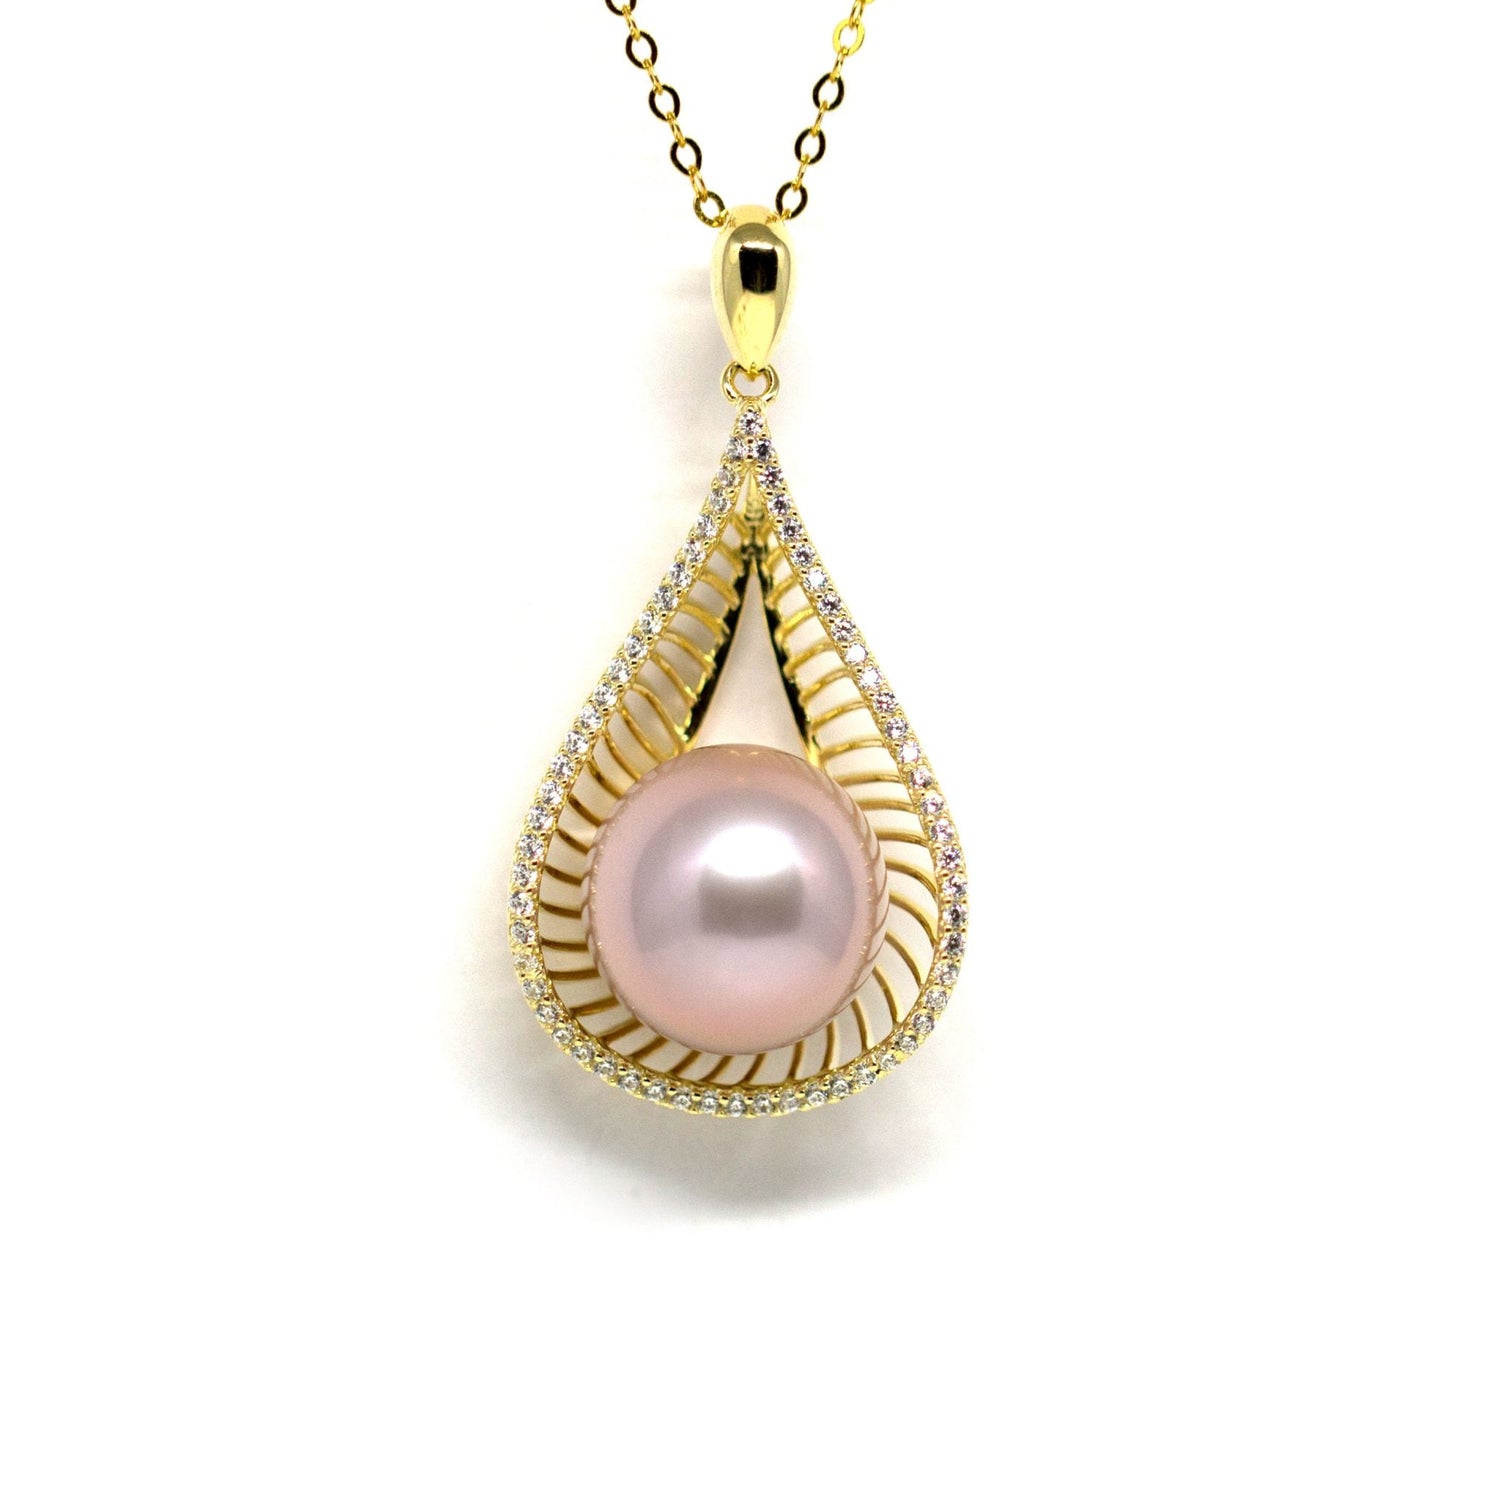 Sparkling Waterdrop Edison Pearl Necklace - Timeless Pearl